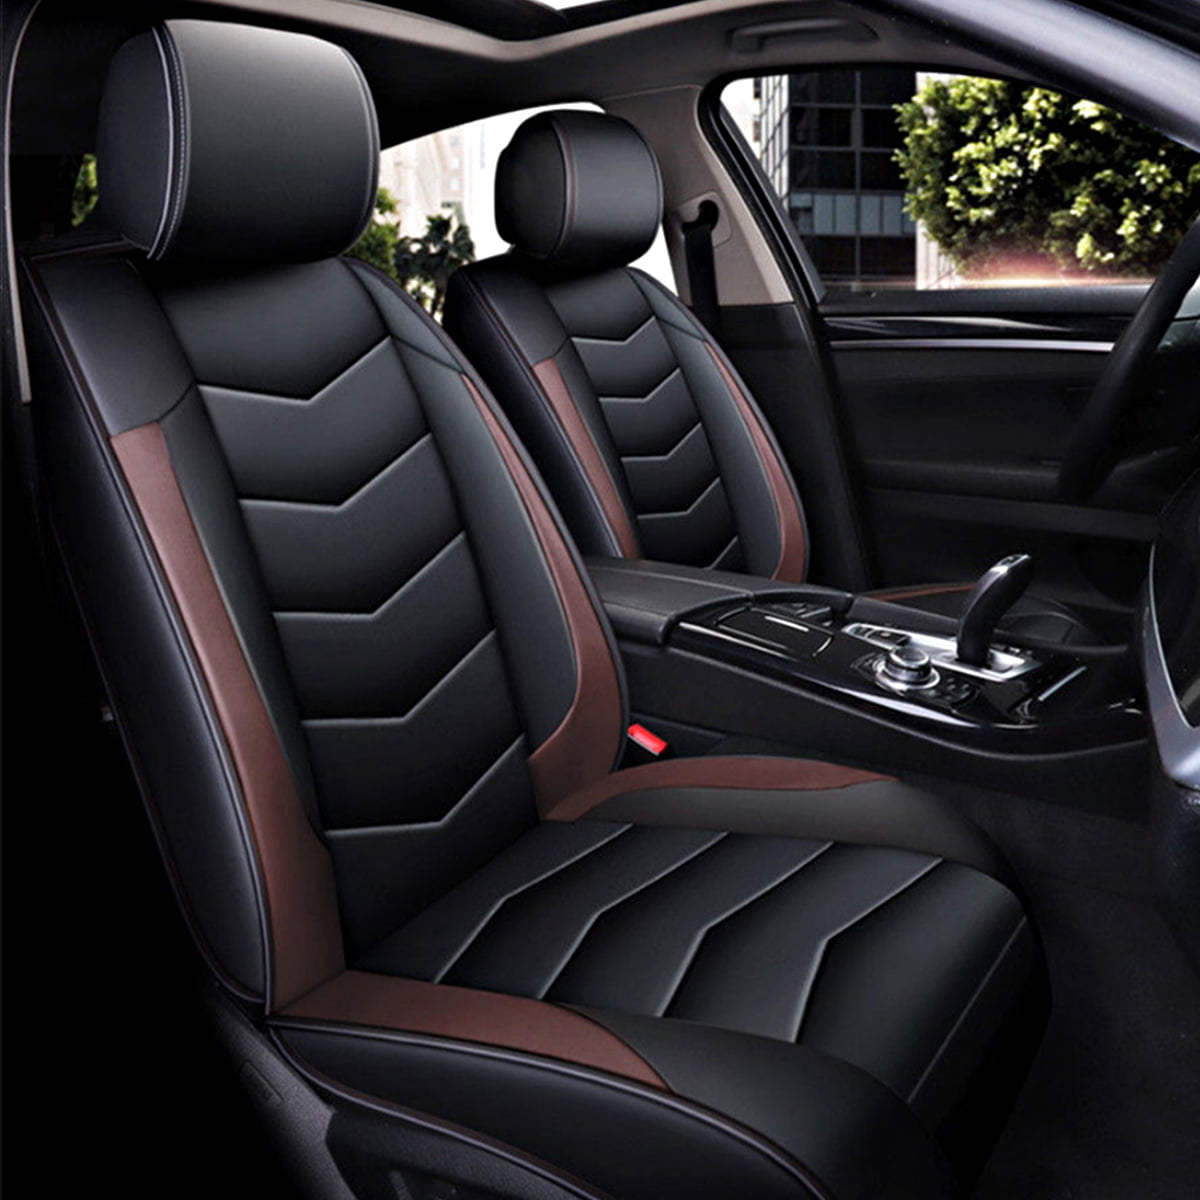 Leather Car Seat Covers Fit Most of Sedan Coupe SUV Truck Beige PU Leather Waterproof Comfortable Automotive Vehicle Cushion Cover